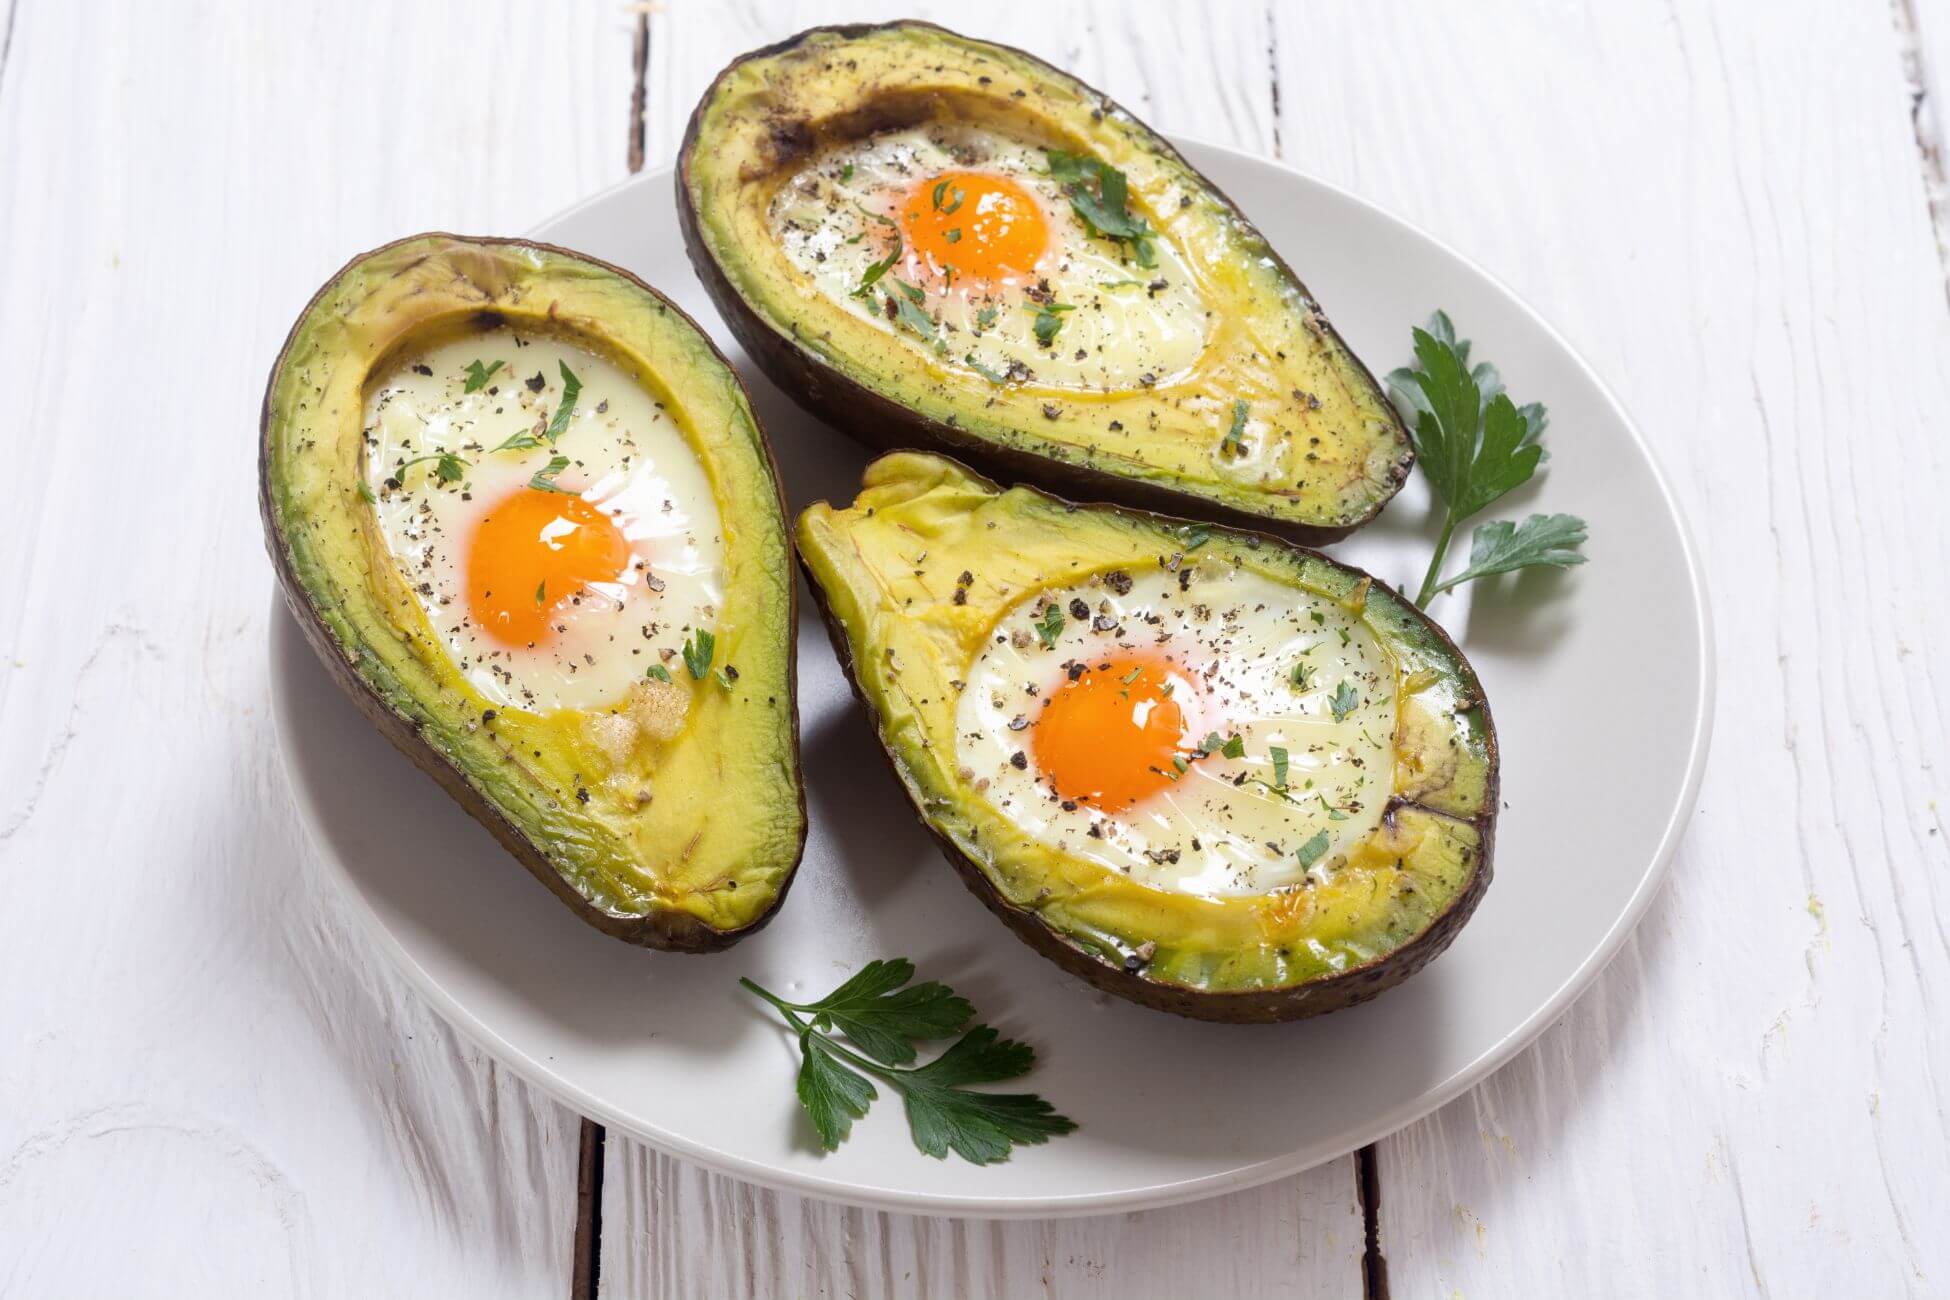 Half of an baked avocado with the pit removed, and an egg cooked sunny-side-up in each hollow sits on a white plate. 